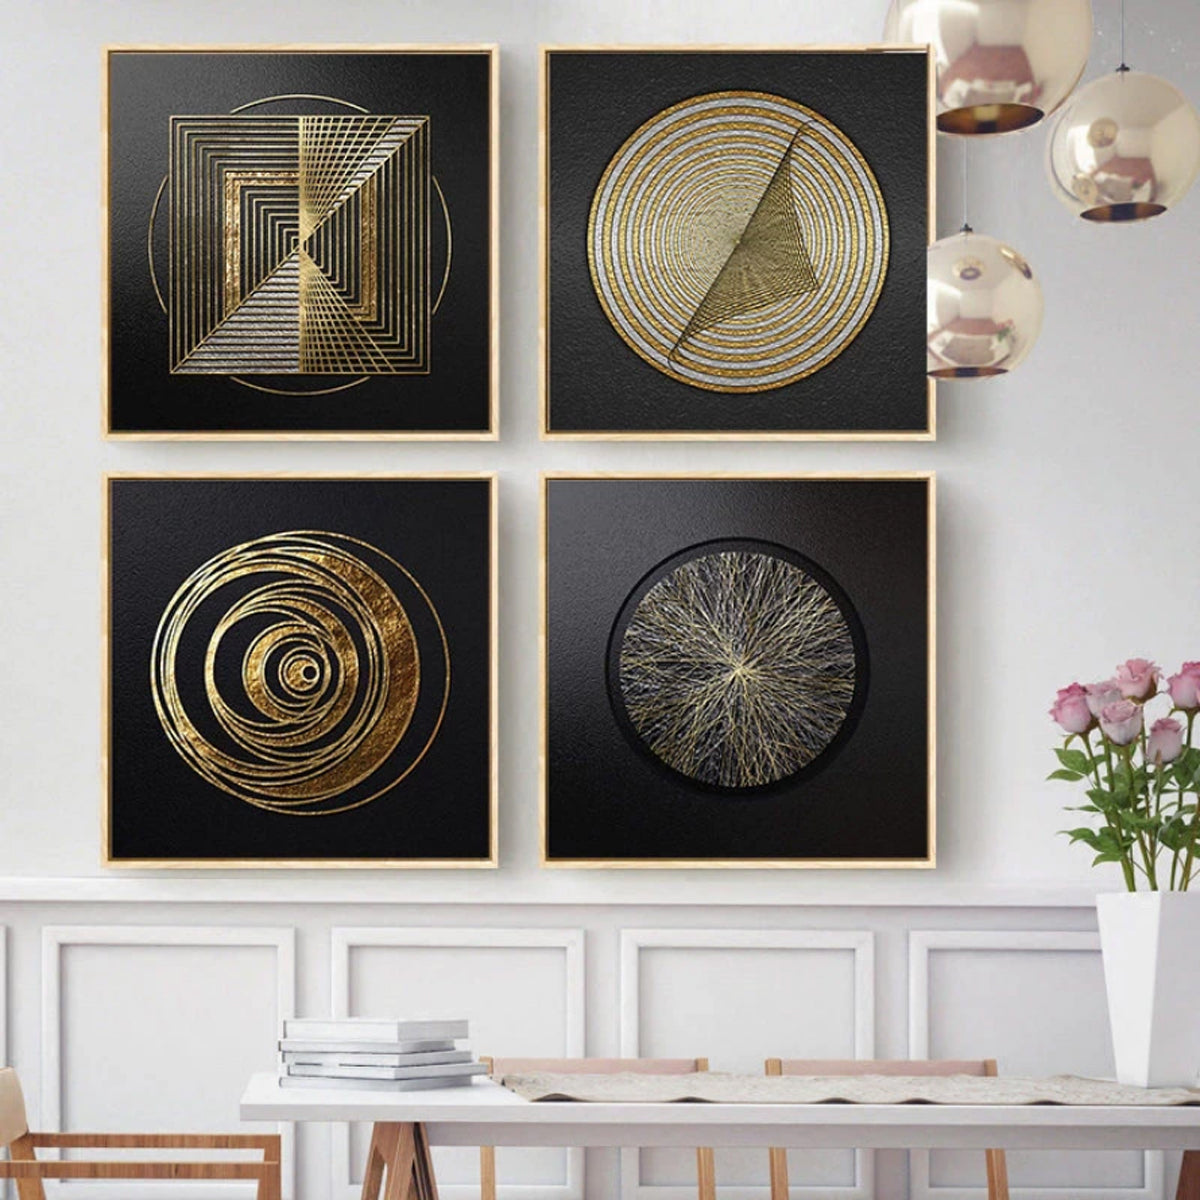 TPFLiving art print black / 6 motifs on Traumpreisfabrik canvas 5 – si abstract gold / in